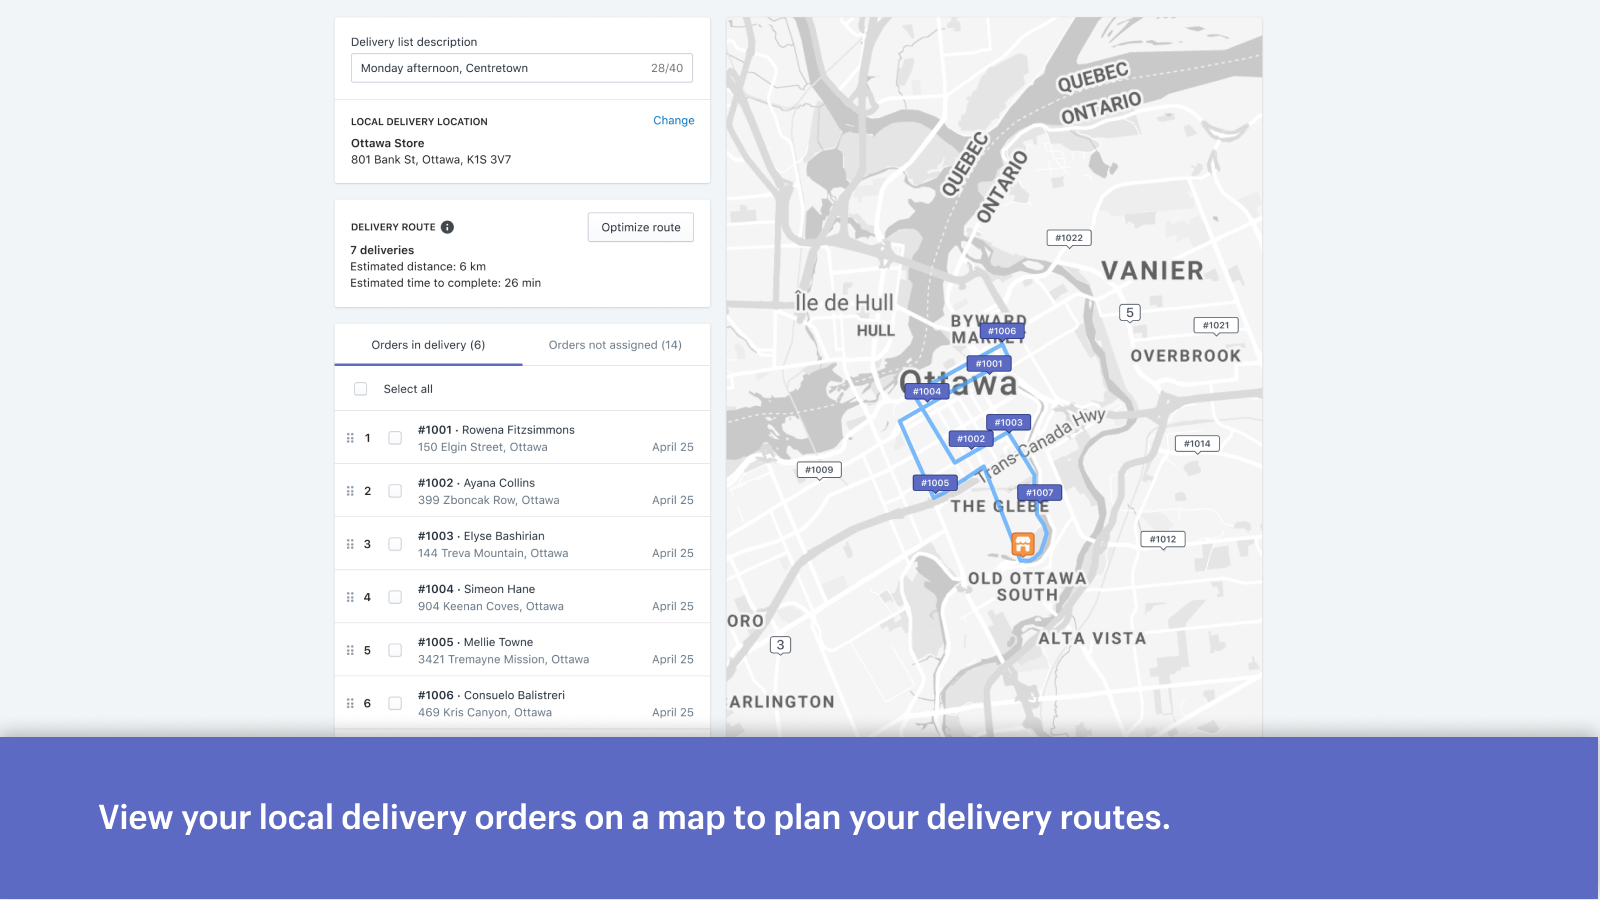 View your local delivery orders on a map to plan your deliveries